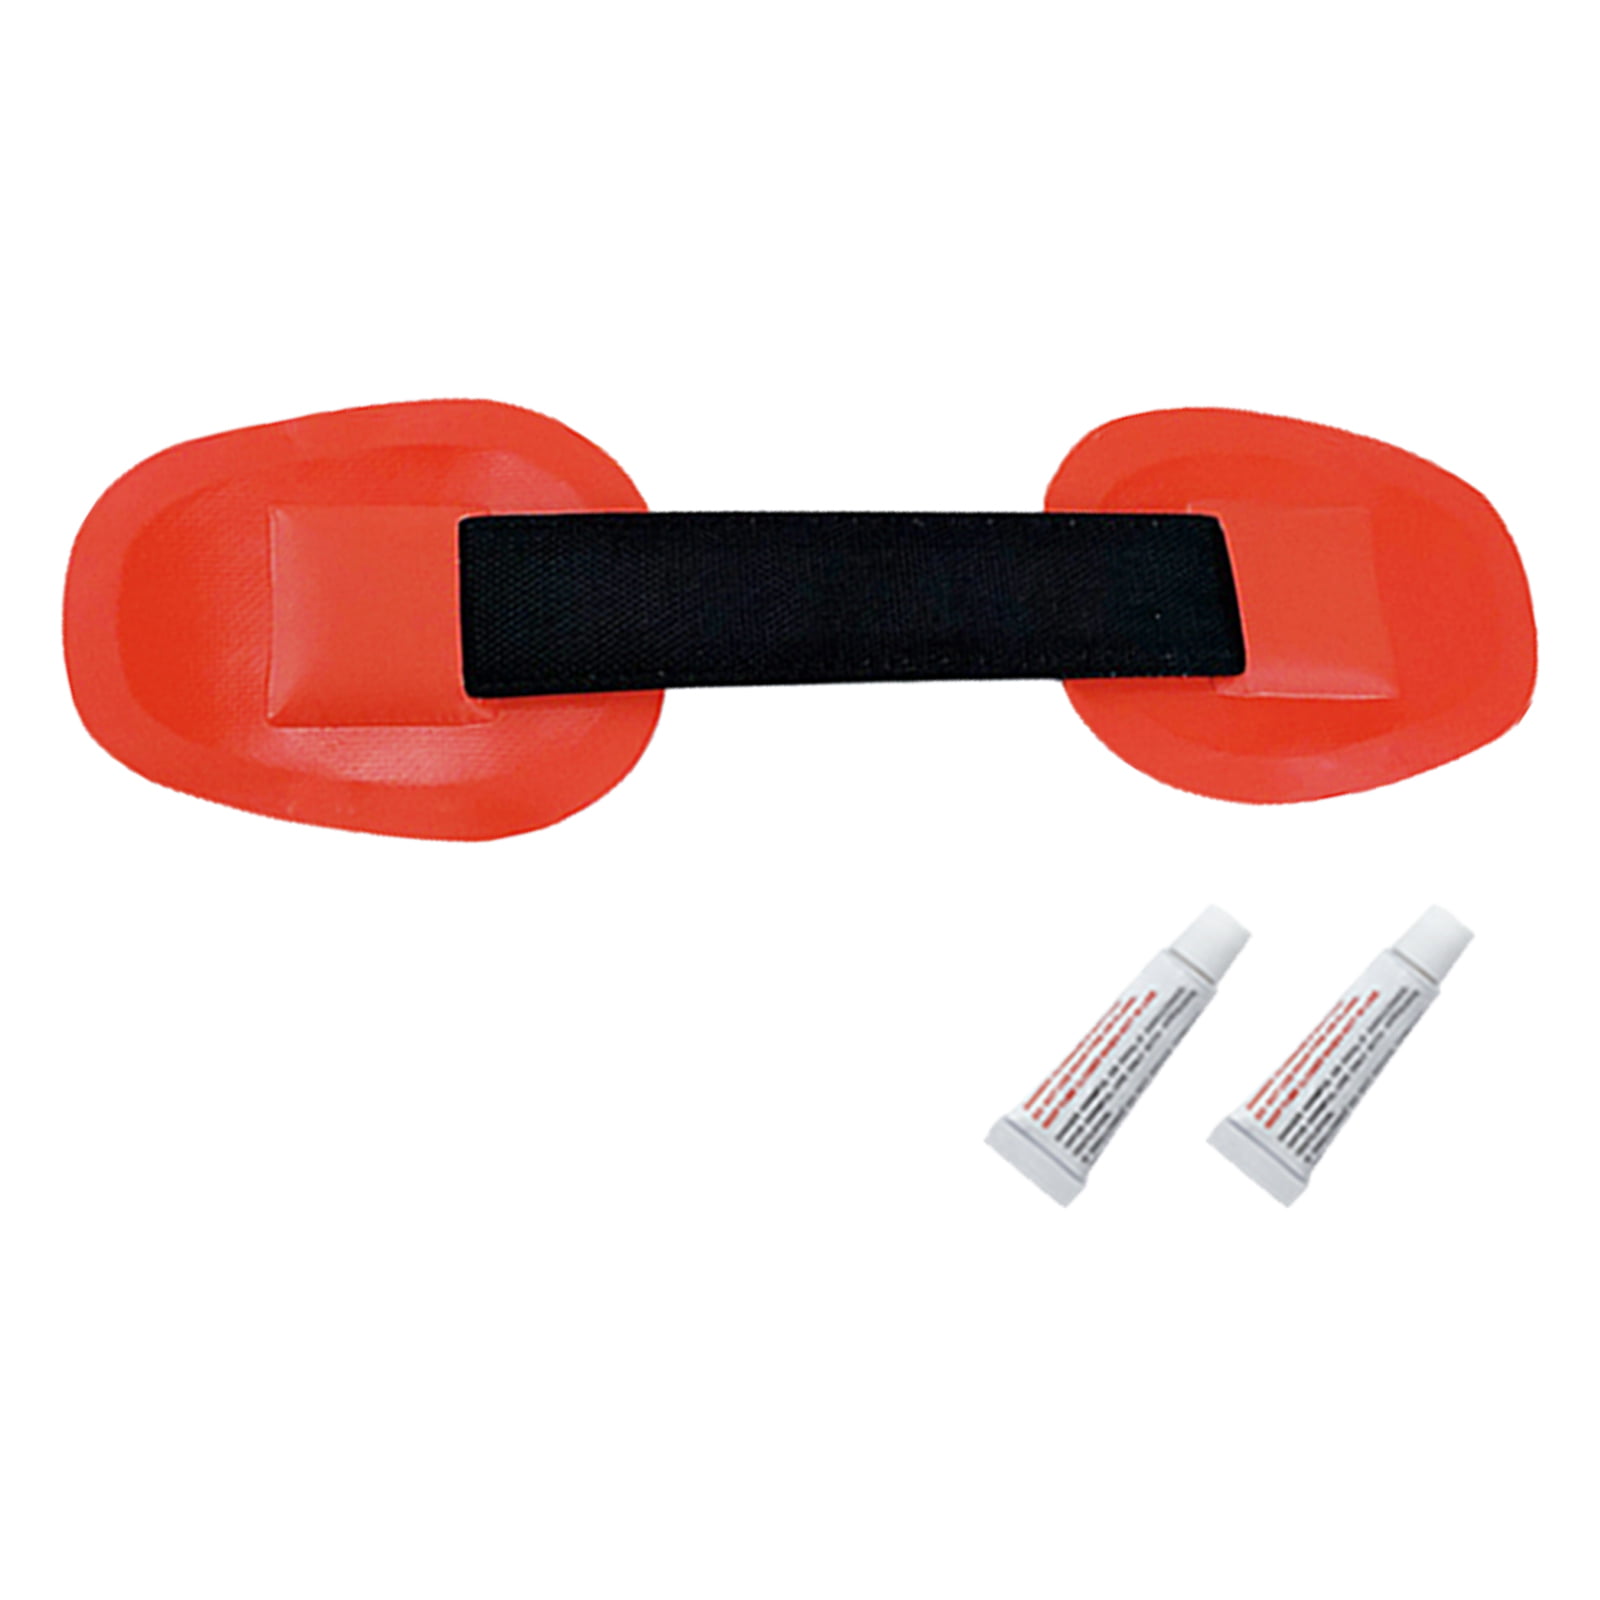 Inflatable Dinghy Seat Strap Patch with or without Pvc Adhesive 